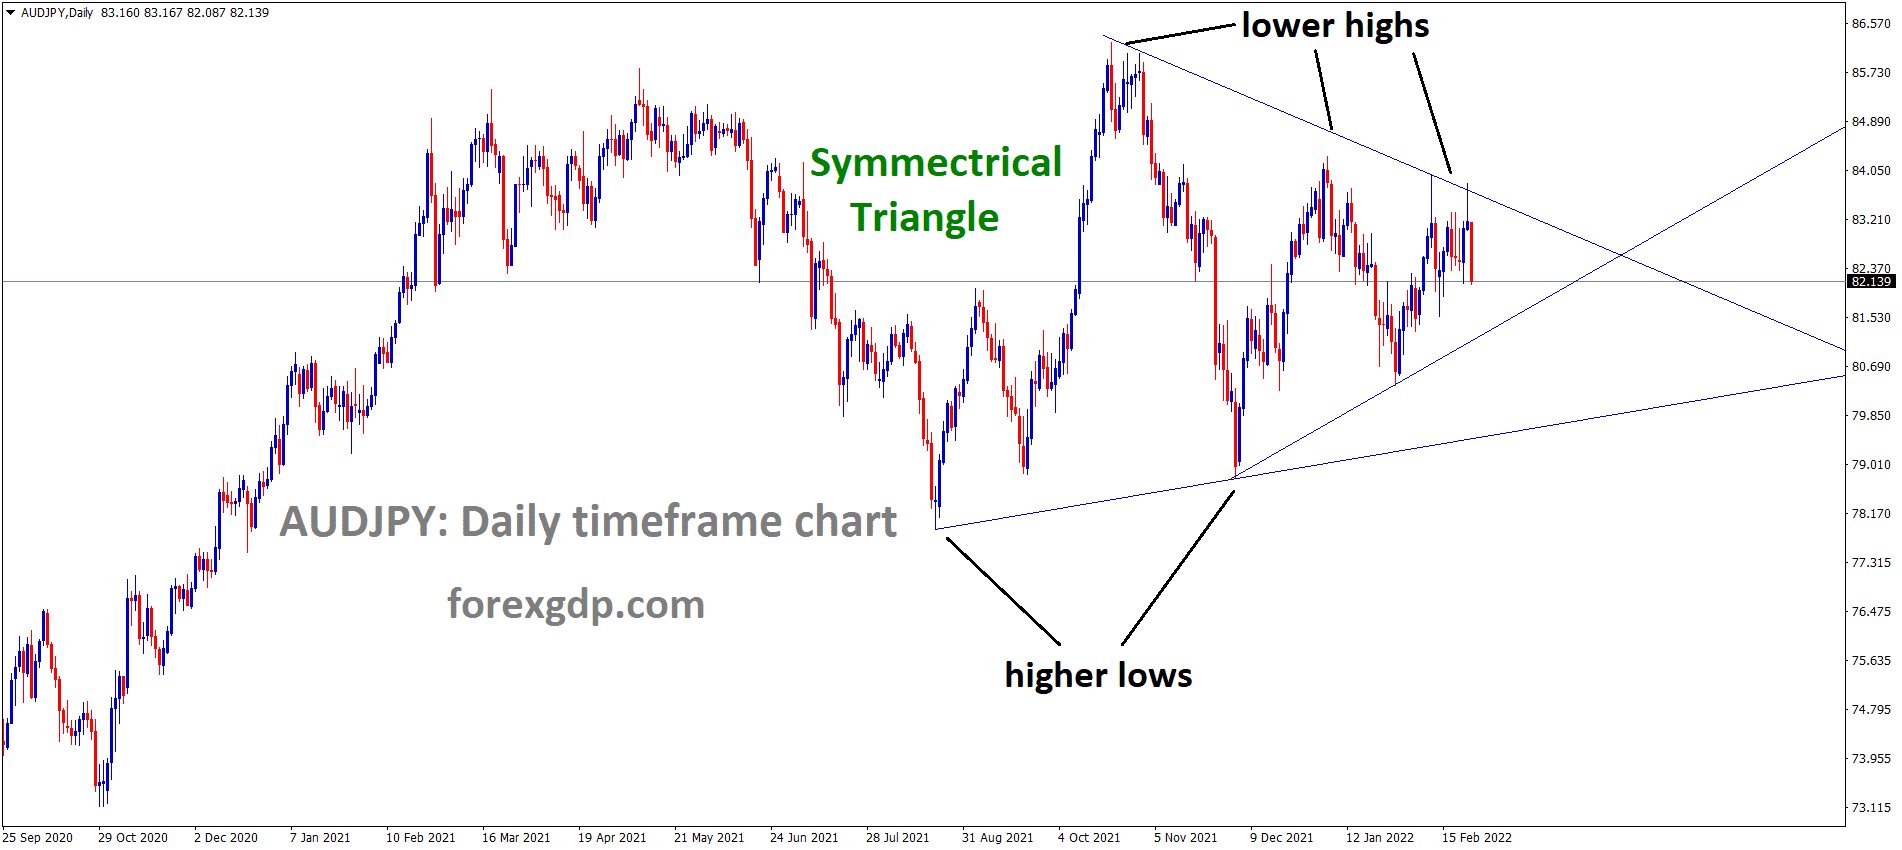 AUDJPY is moving in the Symmetrical triangle pattern and the market has fallen from the Top area of the pattern.